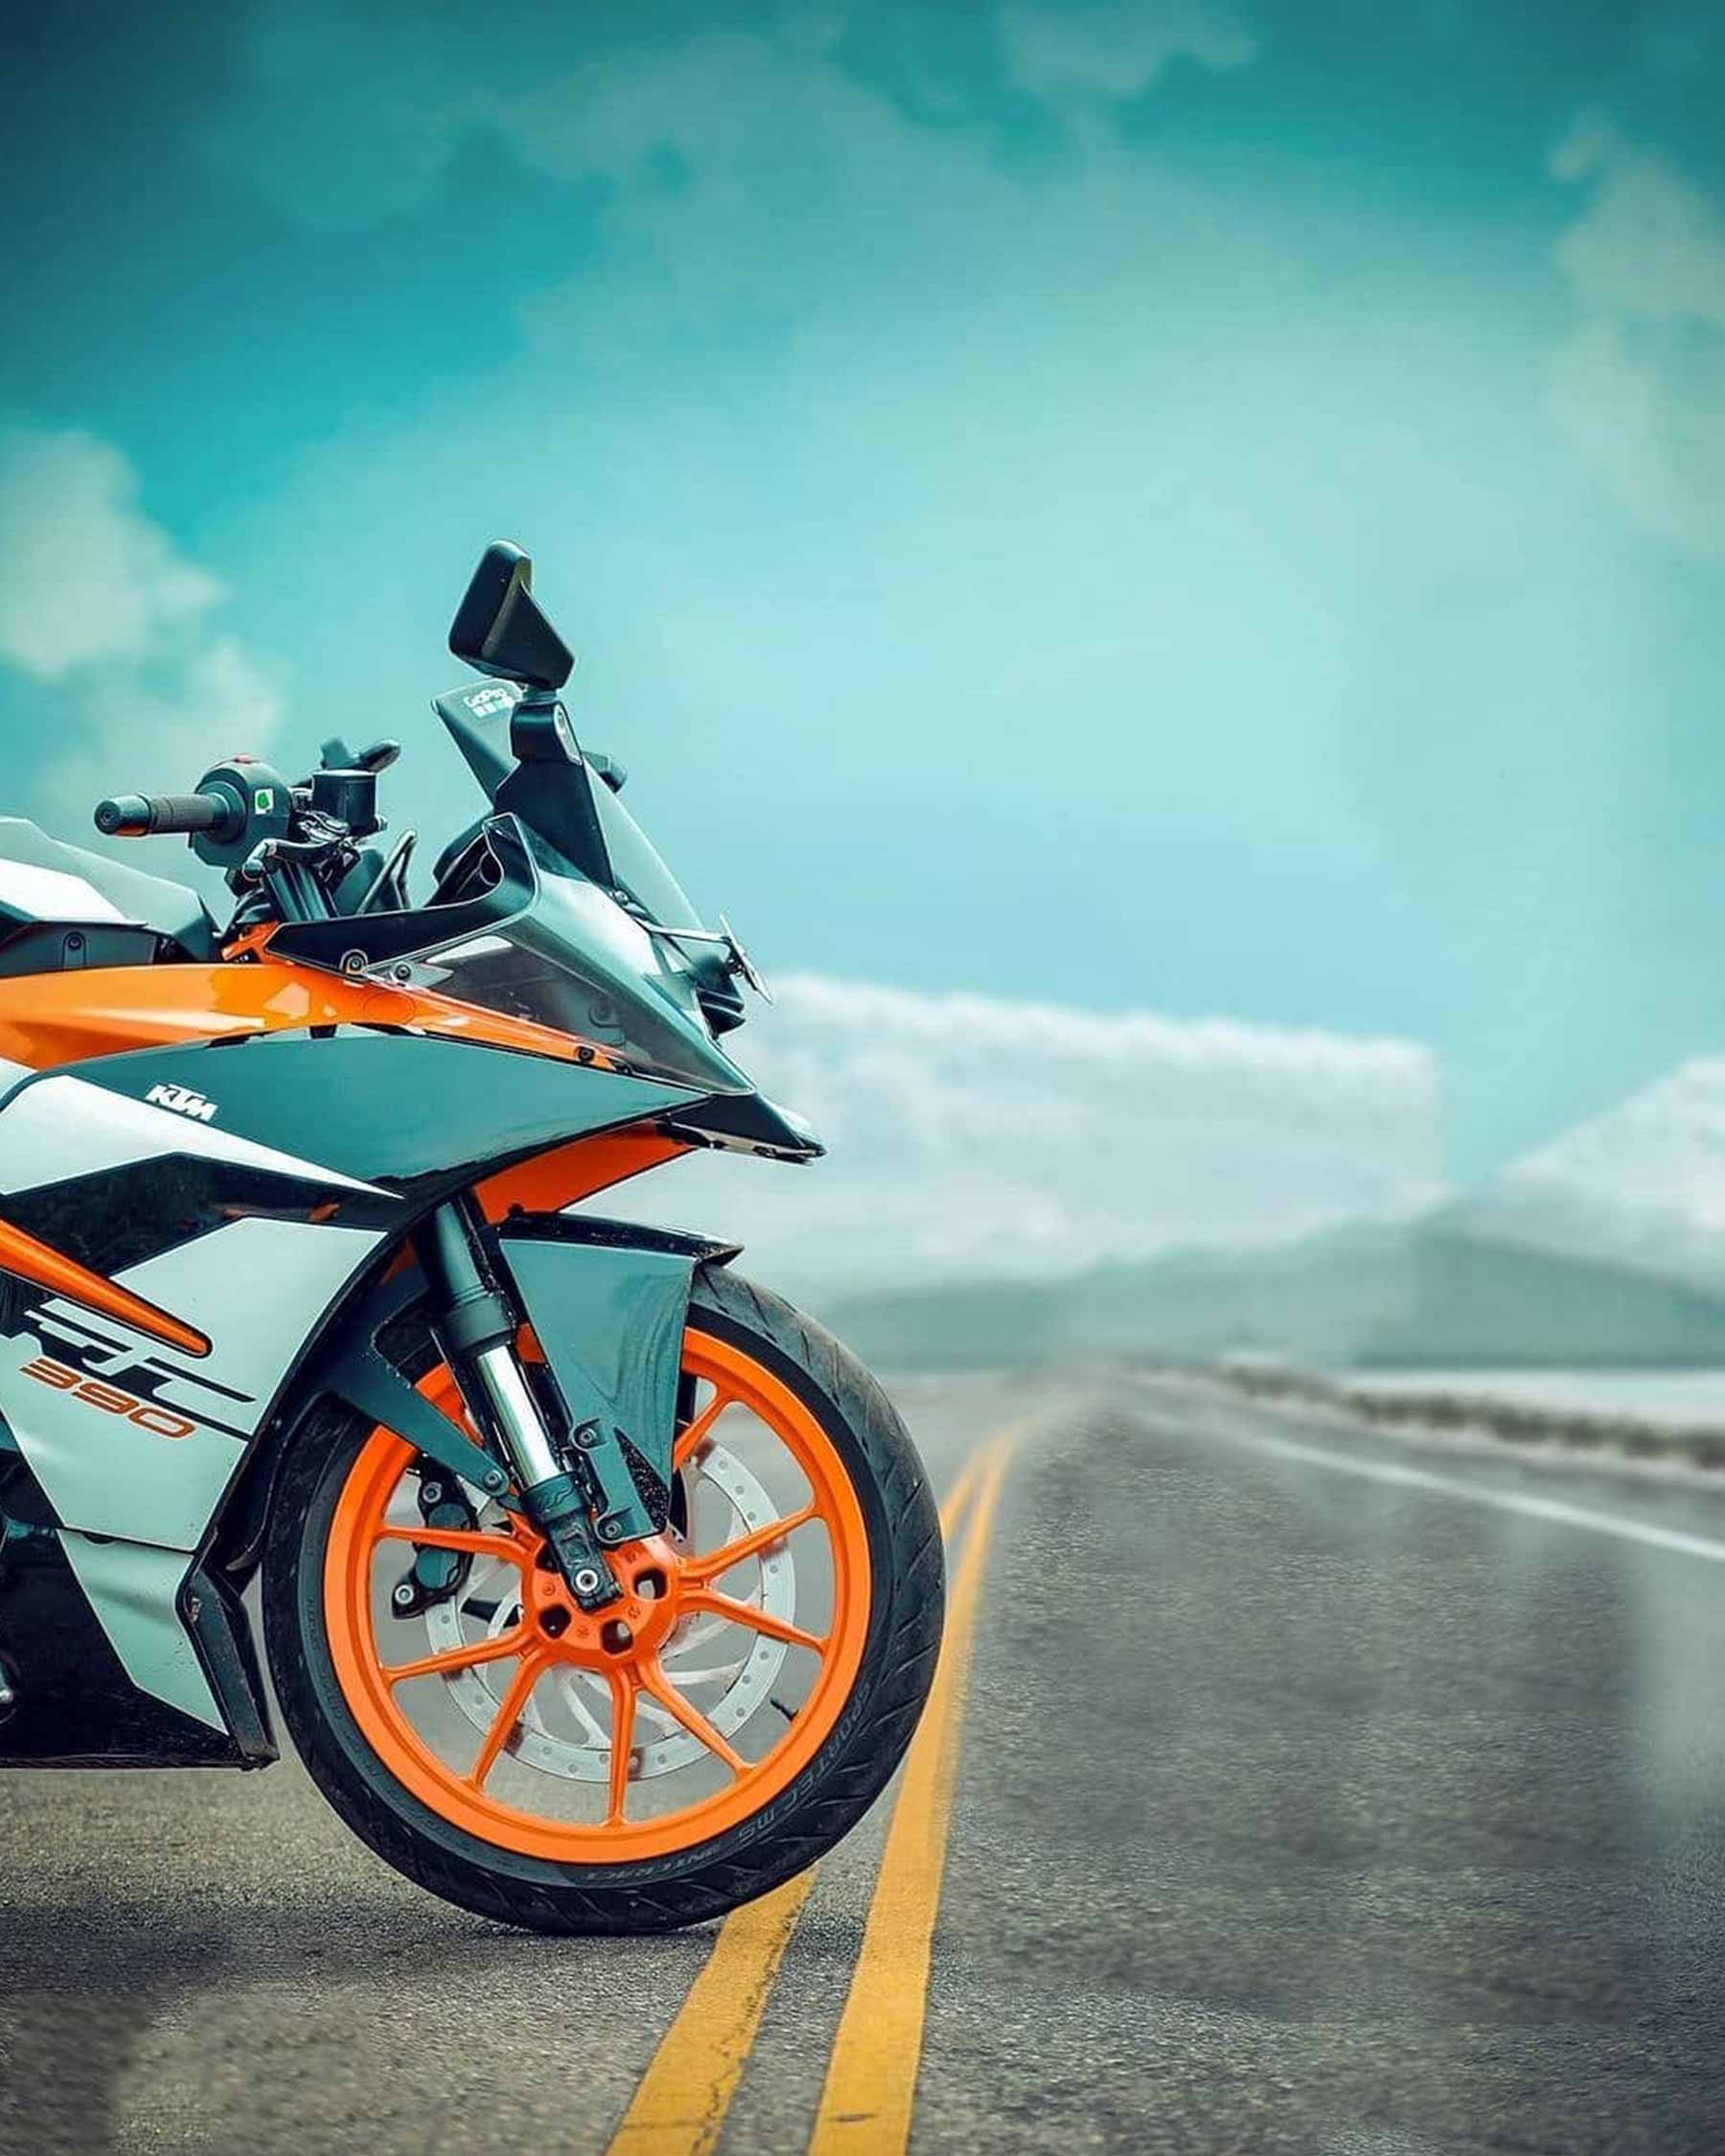 KTM on Road Snapseed Background Free Stock Image